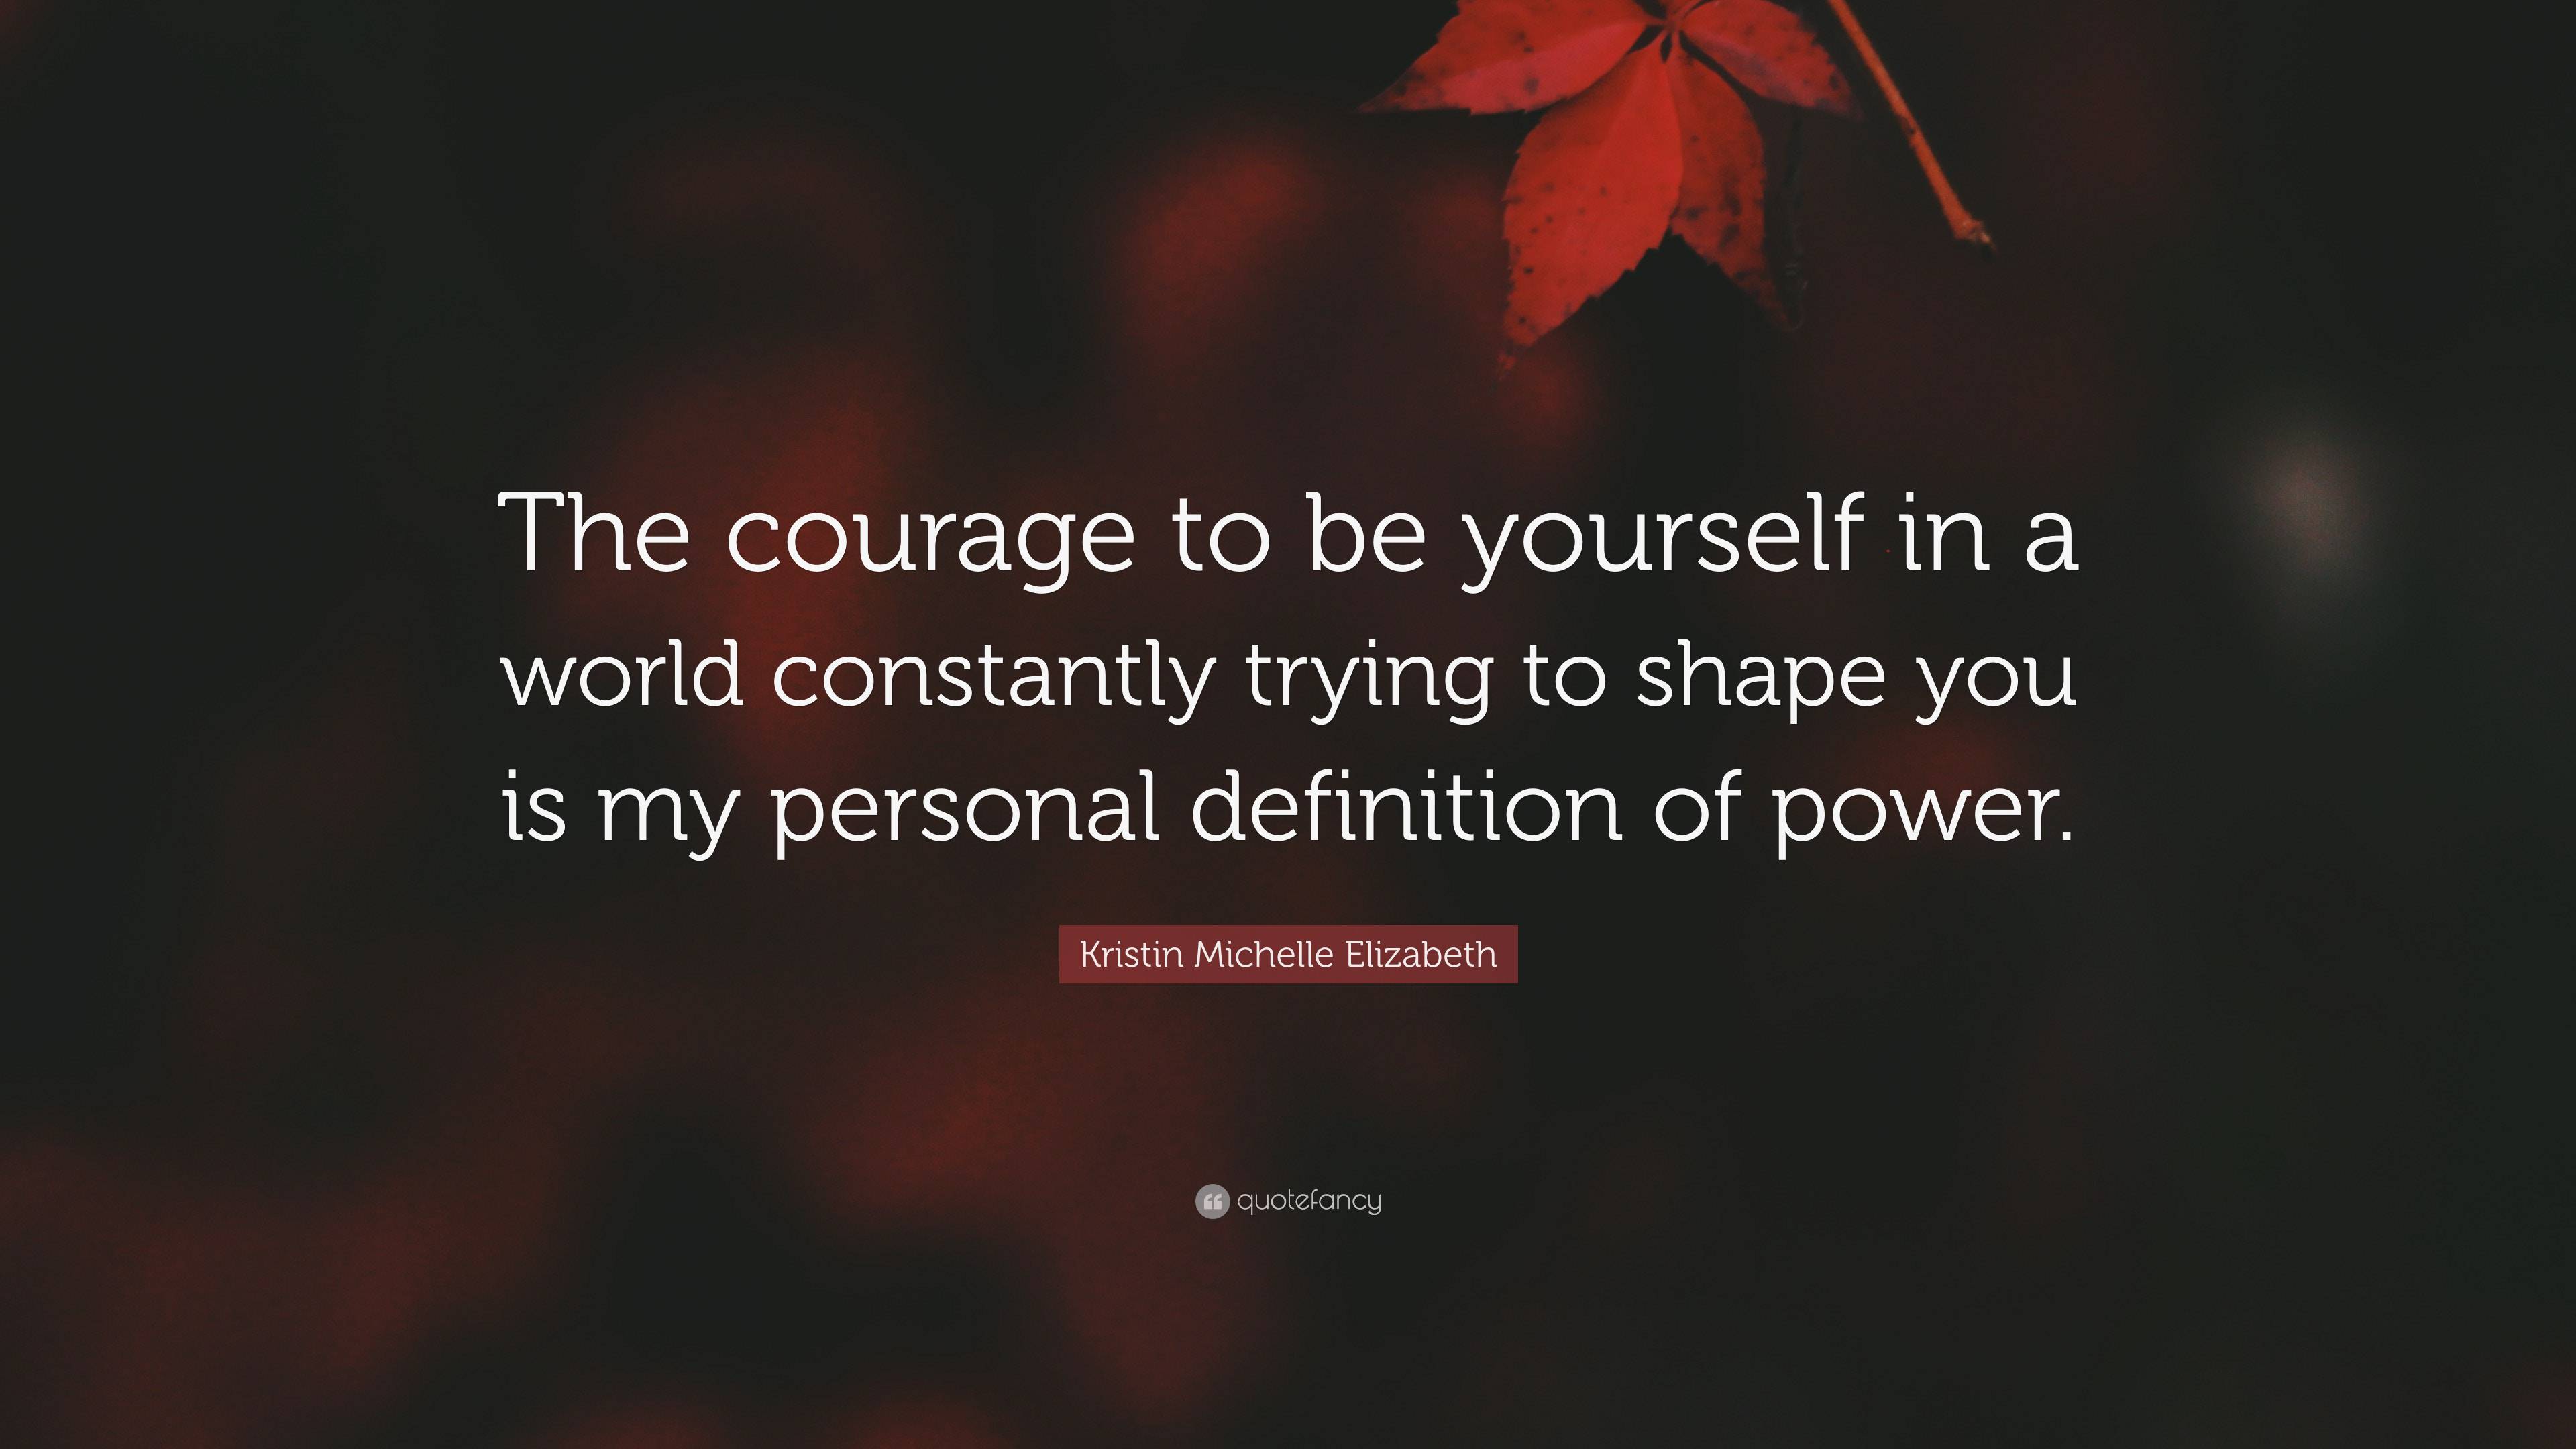 Kristin Michelle Elizabeth Quote: “The courage to be yourself in a ...